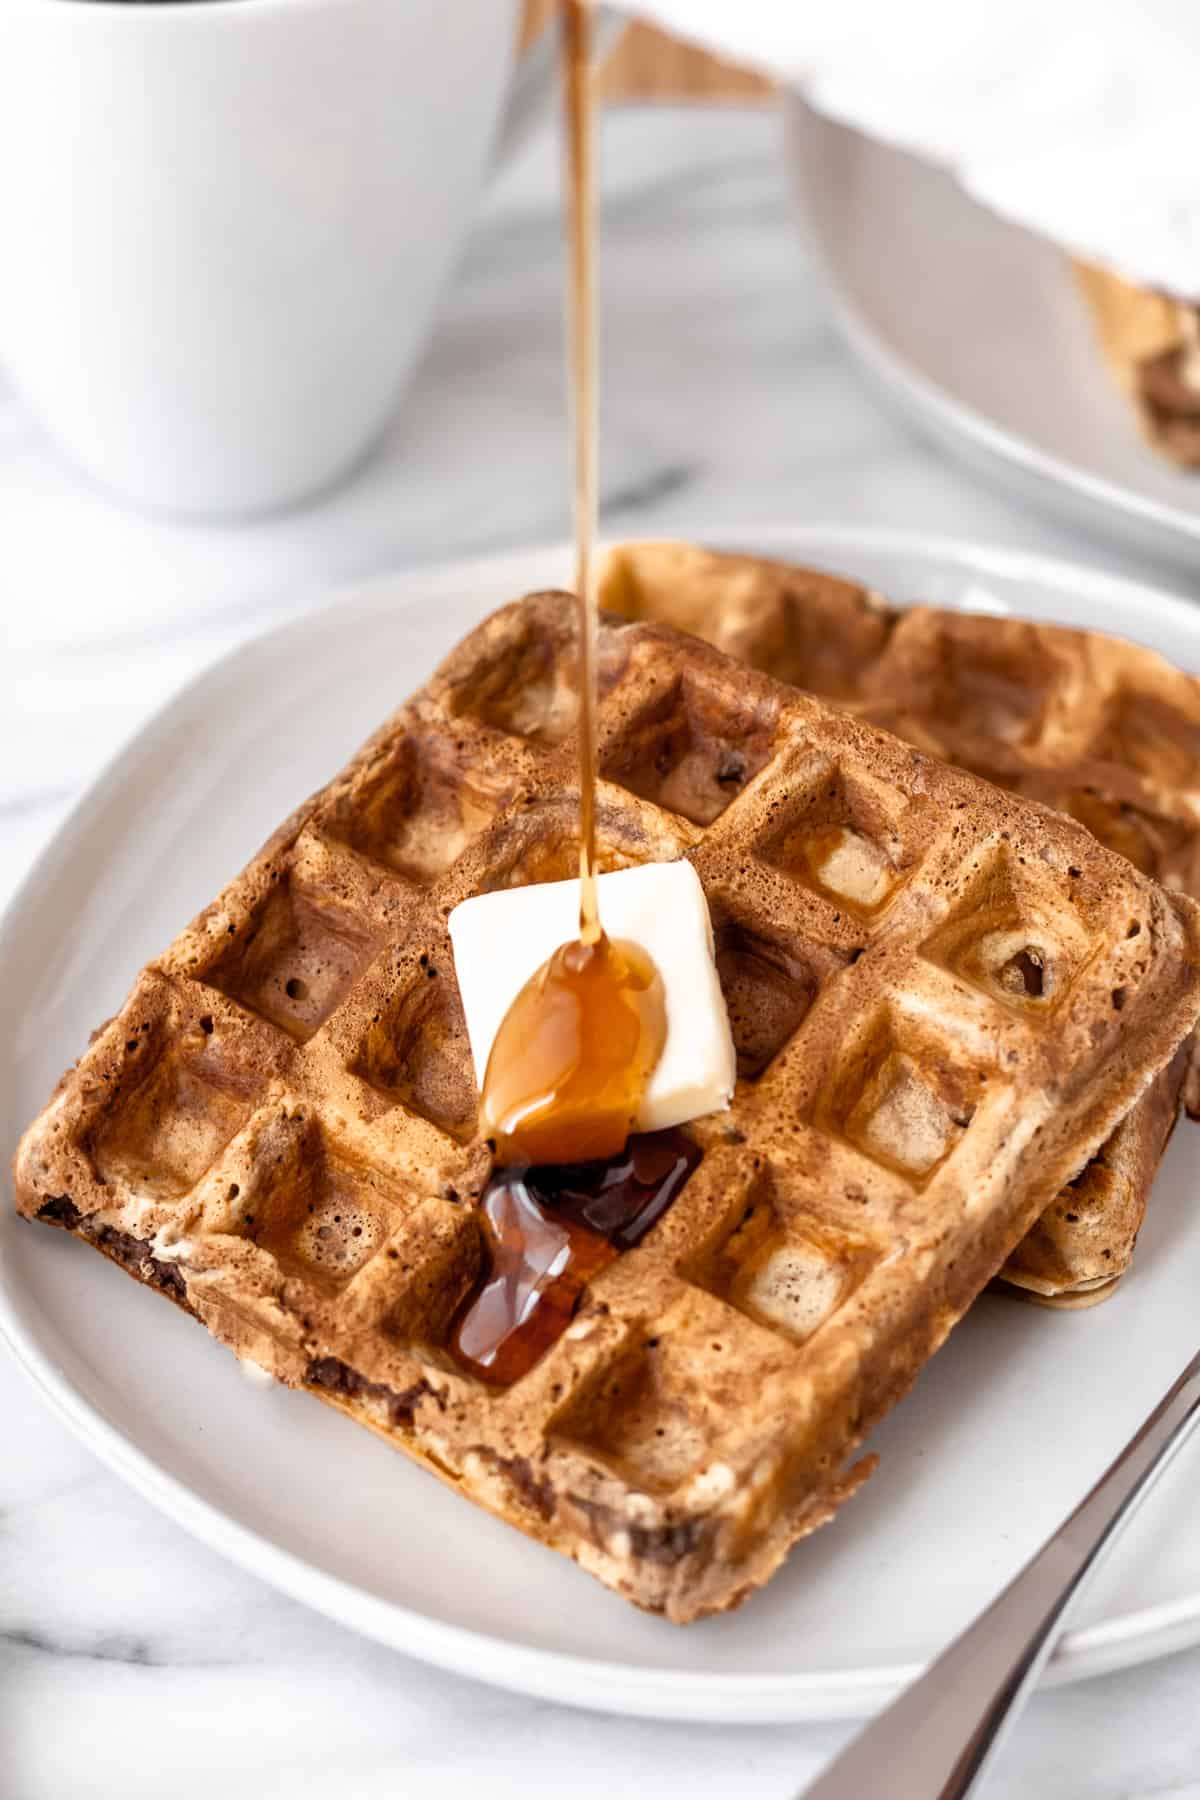 Maple syrup being poured onto chocolate peanut butter waffles on a white plate.